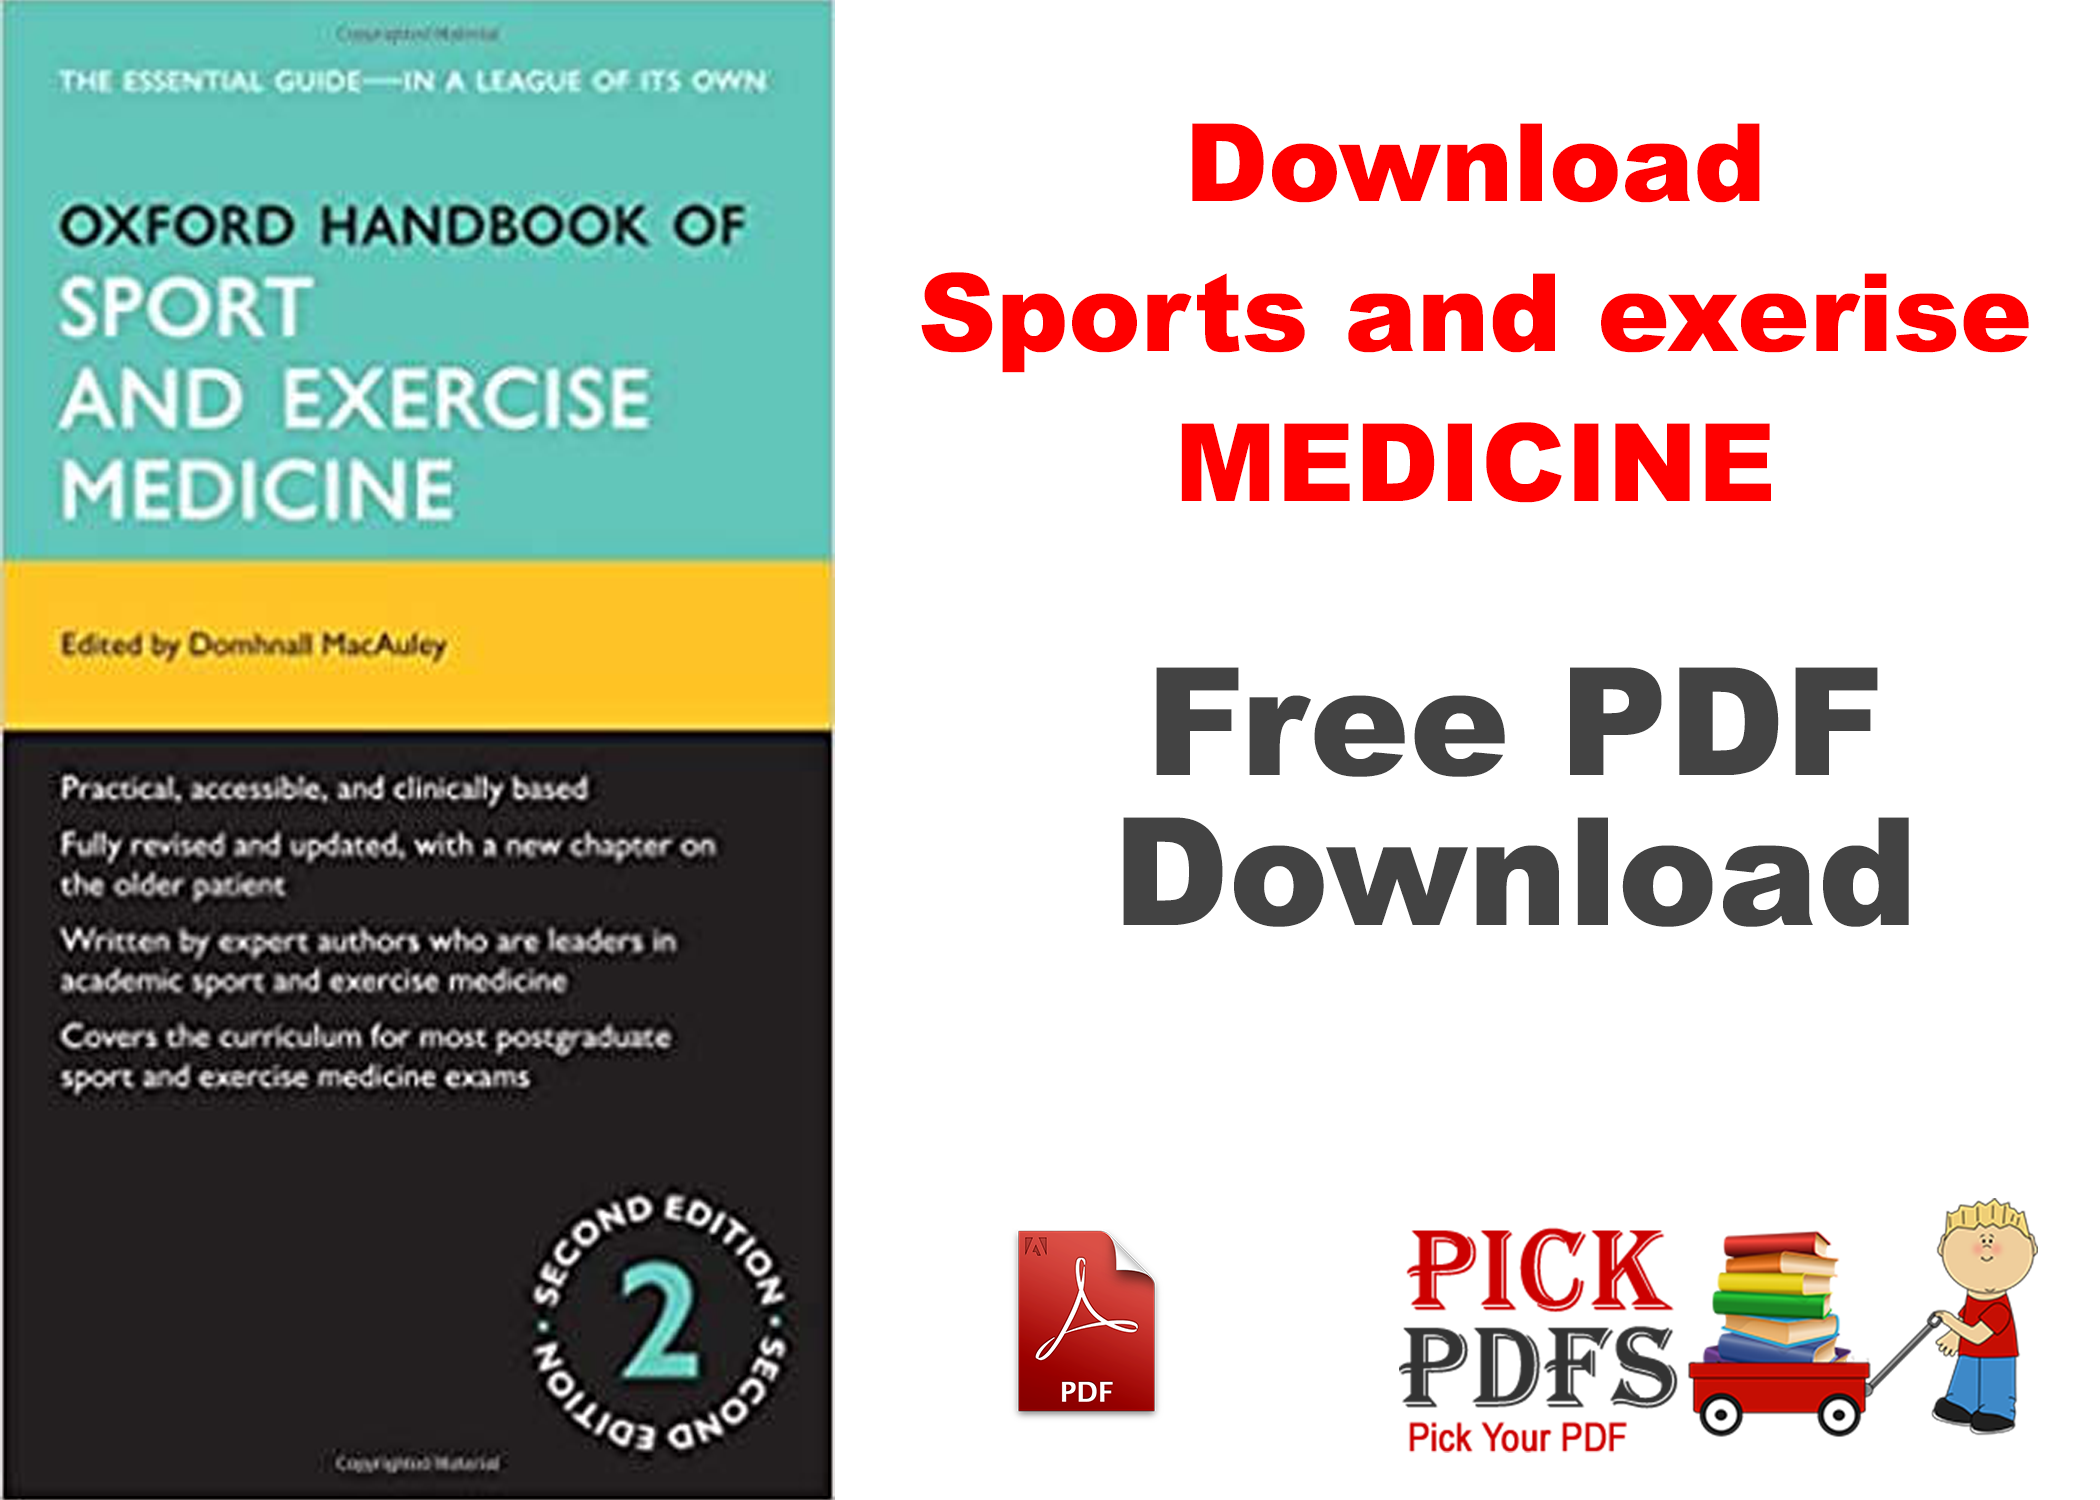 https://pickpdfs.com/sports-medicine-2nd-edition-for-review-and-board-free-pdf-book-download/